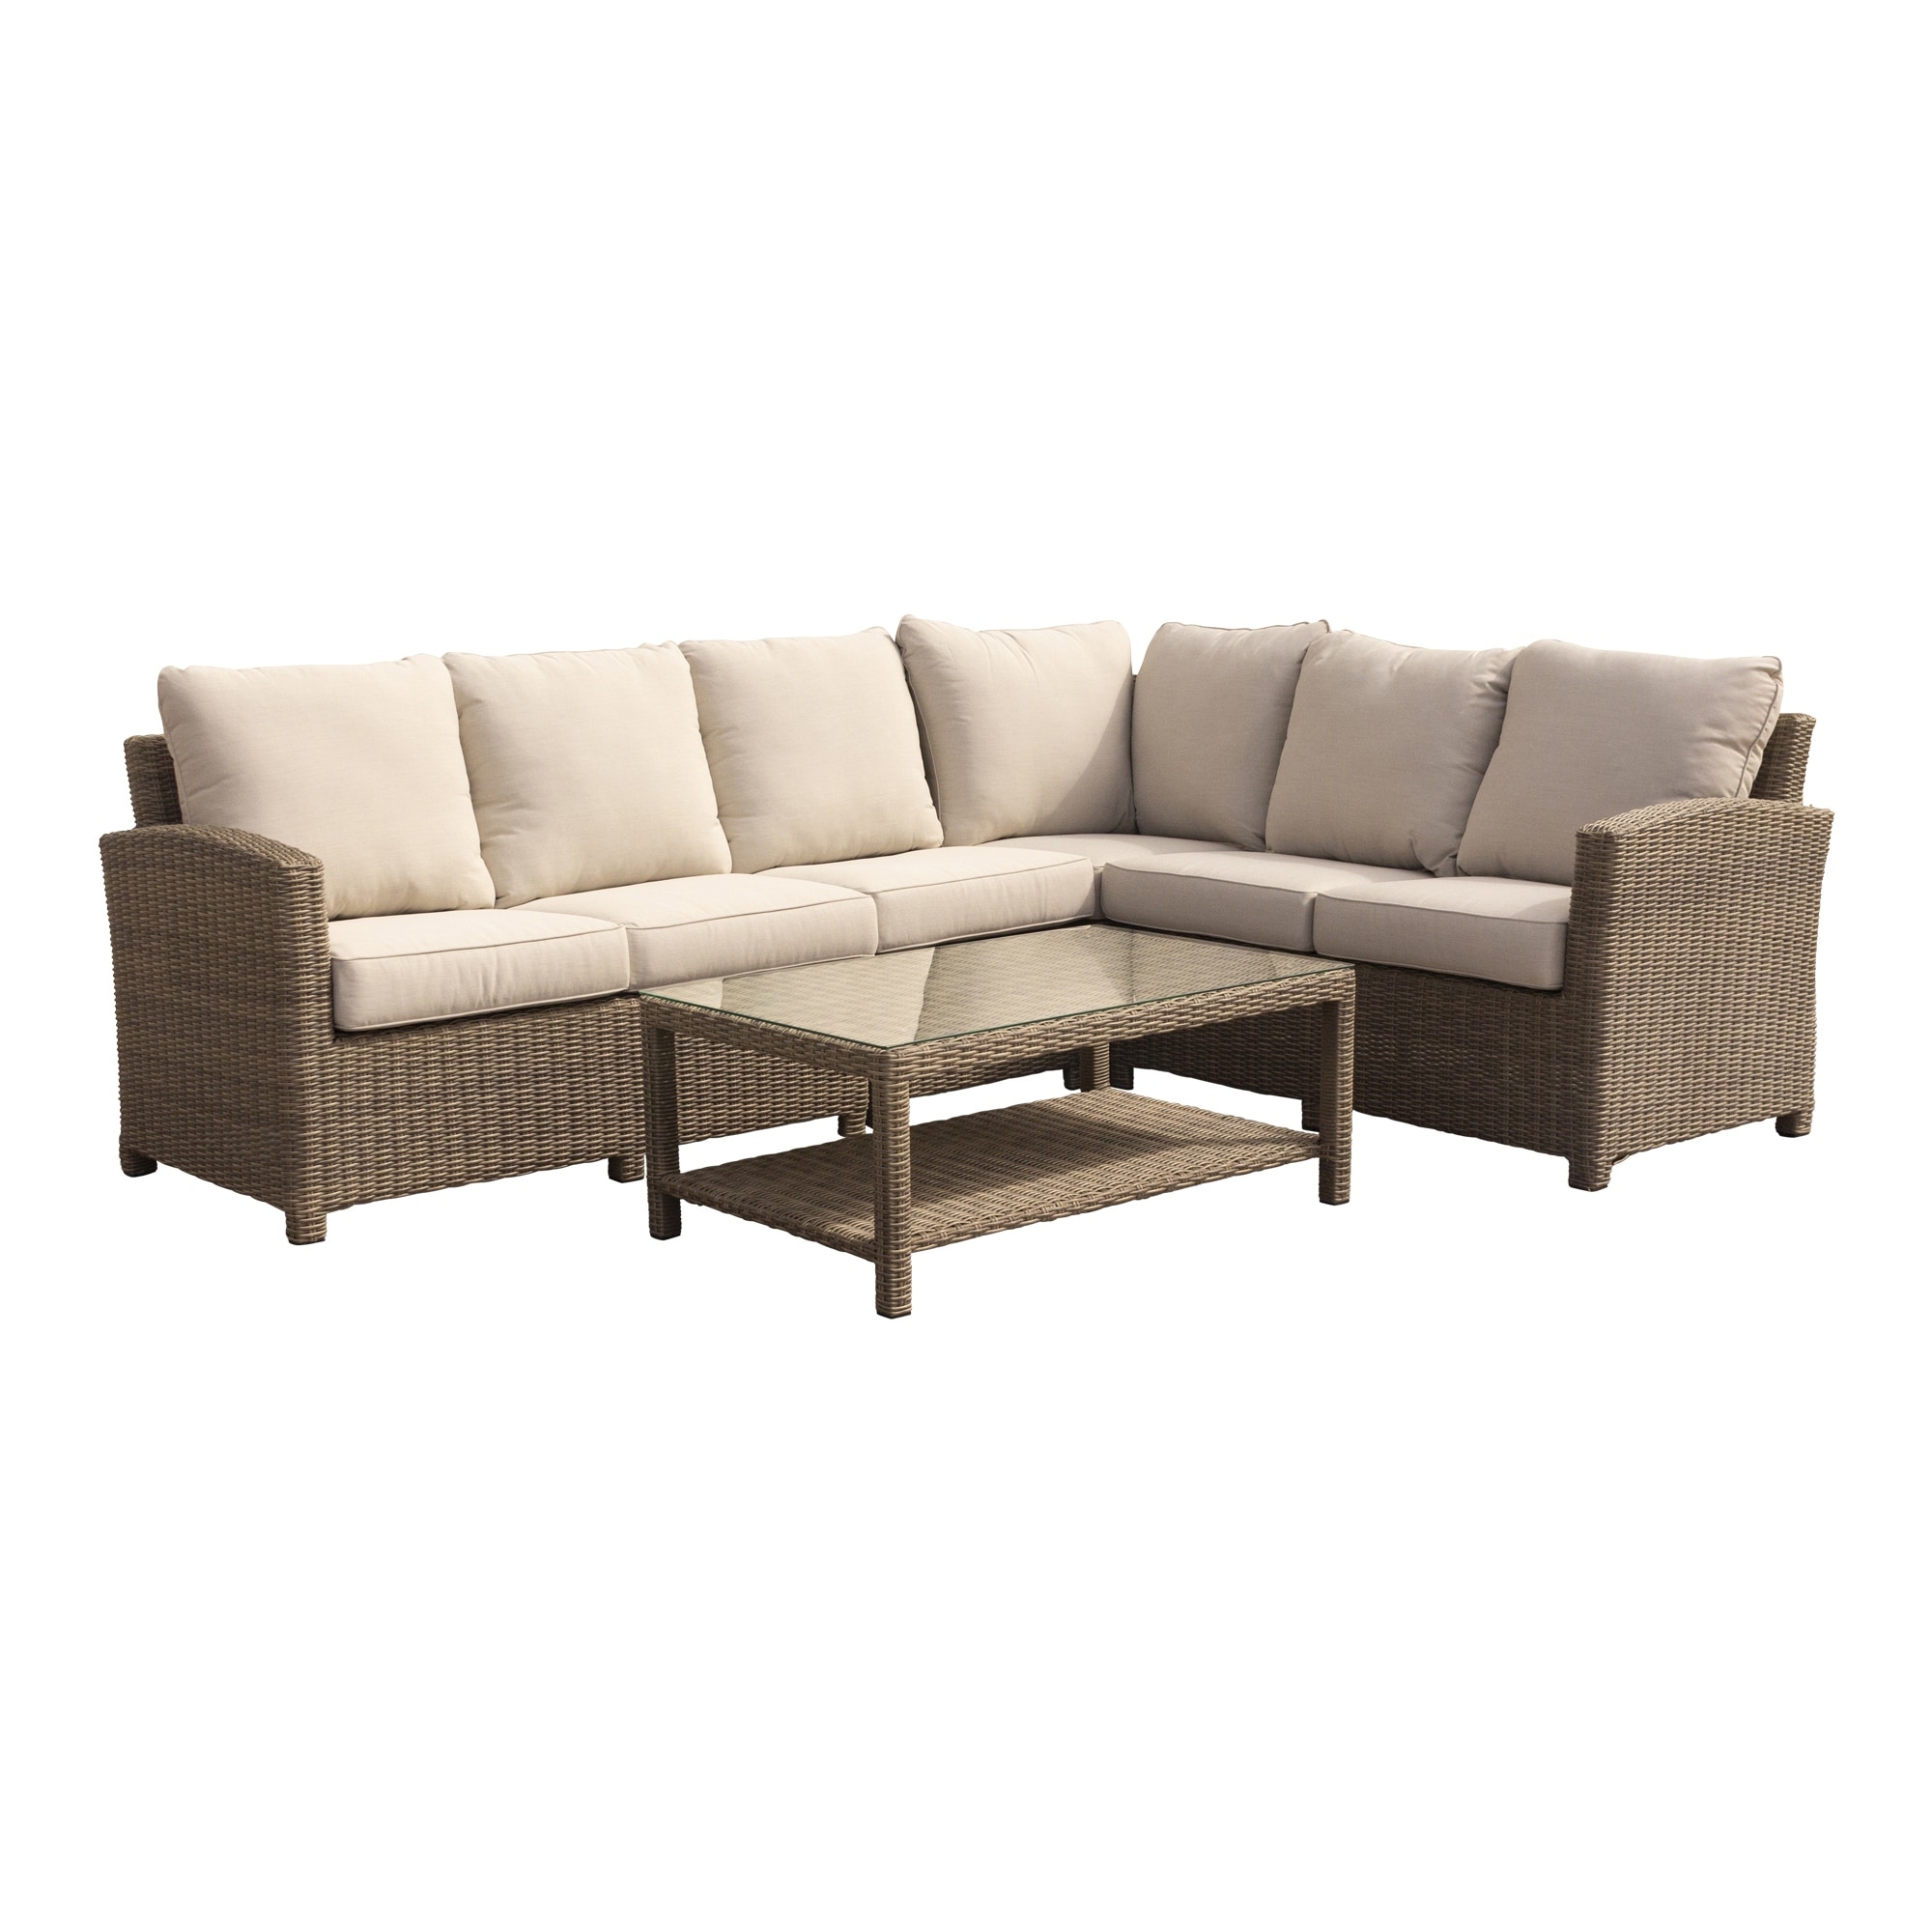 Courtyard Casual Capri 5 Pc Sectional Set With Armless Middle Extenstion